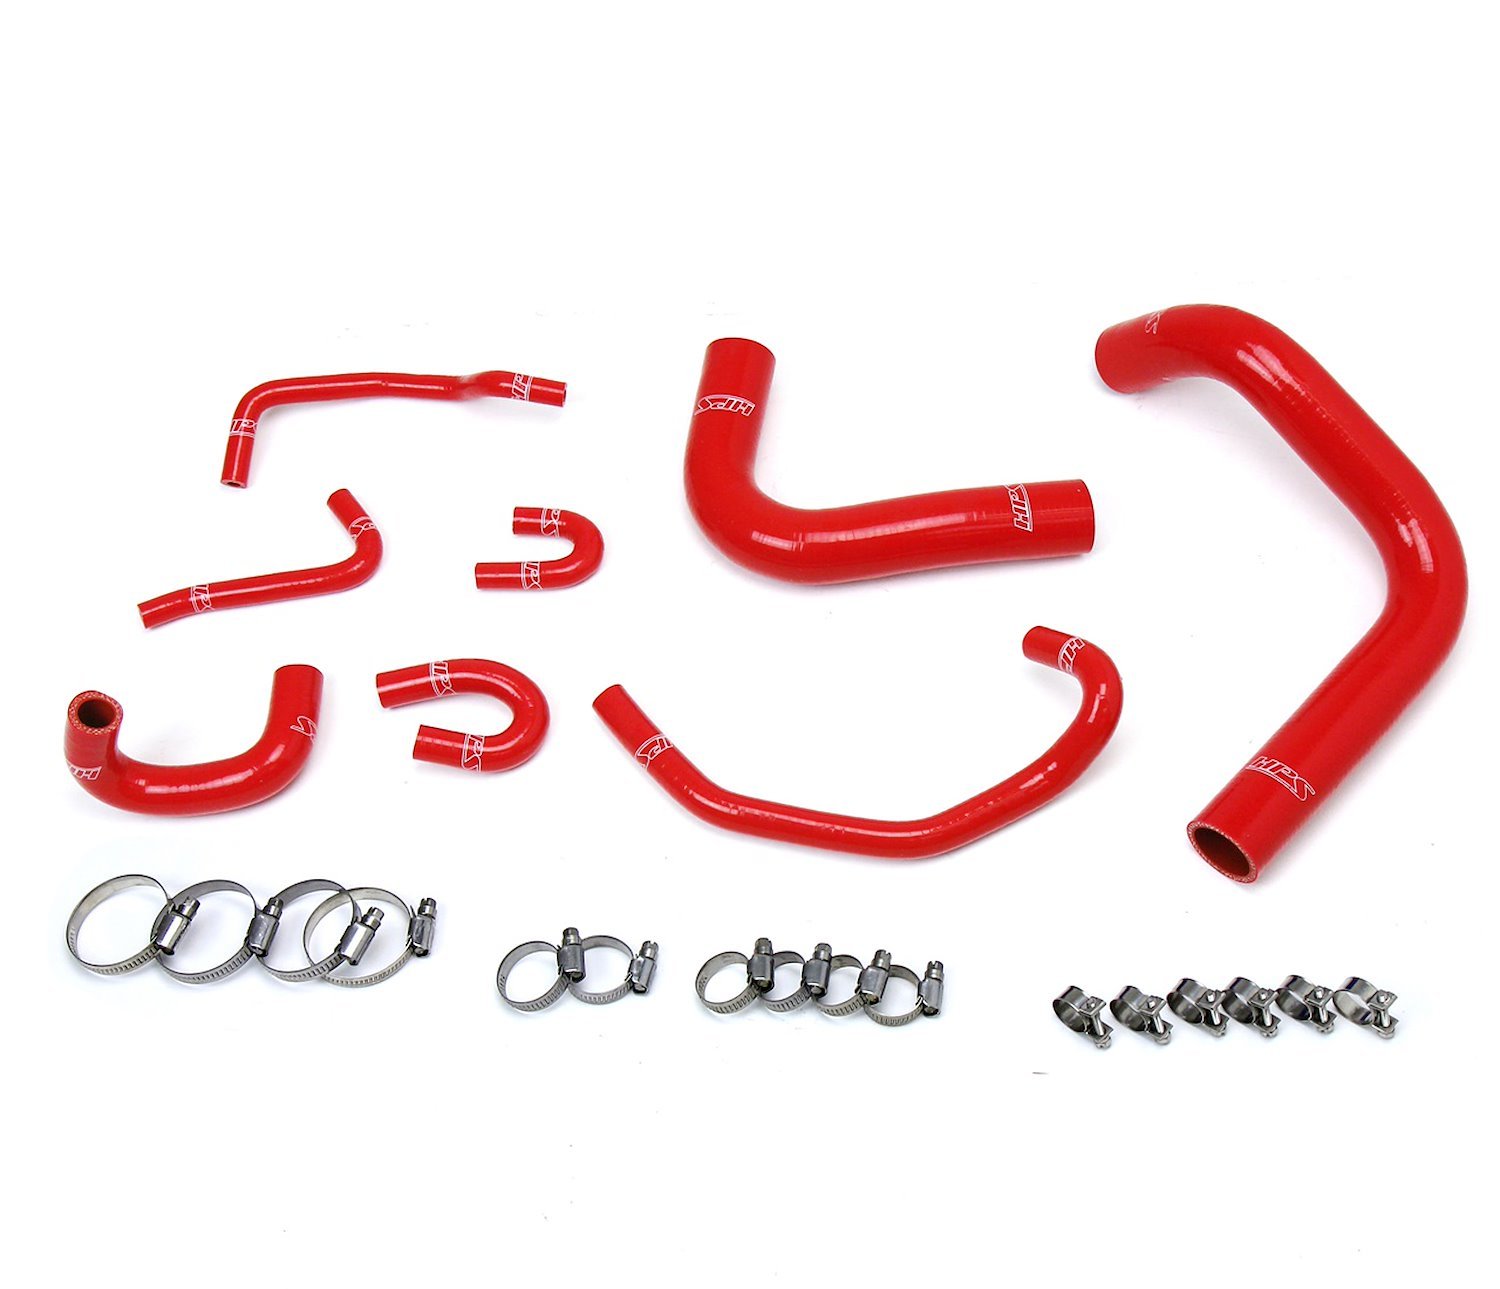 57-1323R-RED Radiator Hose Kit, High-Temp 3-Ply Reinforced Silicone, Replace OEM Rubber Radiator Coolant Hoses